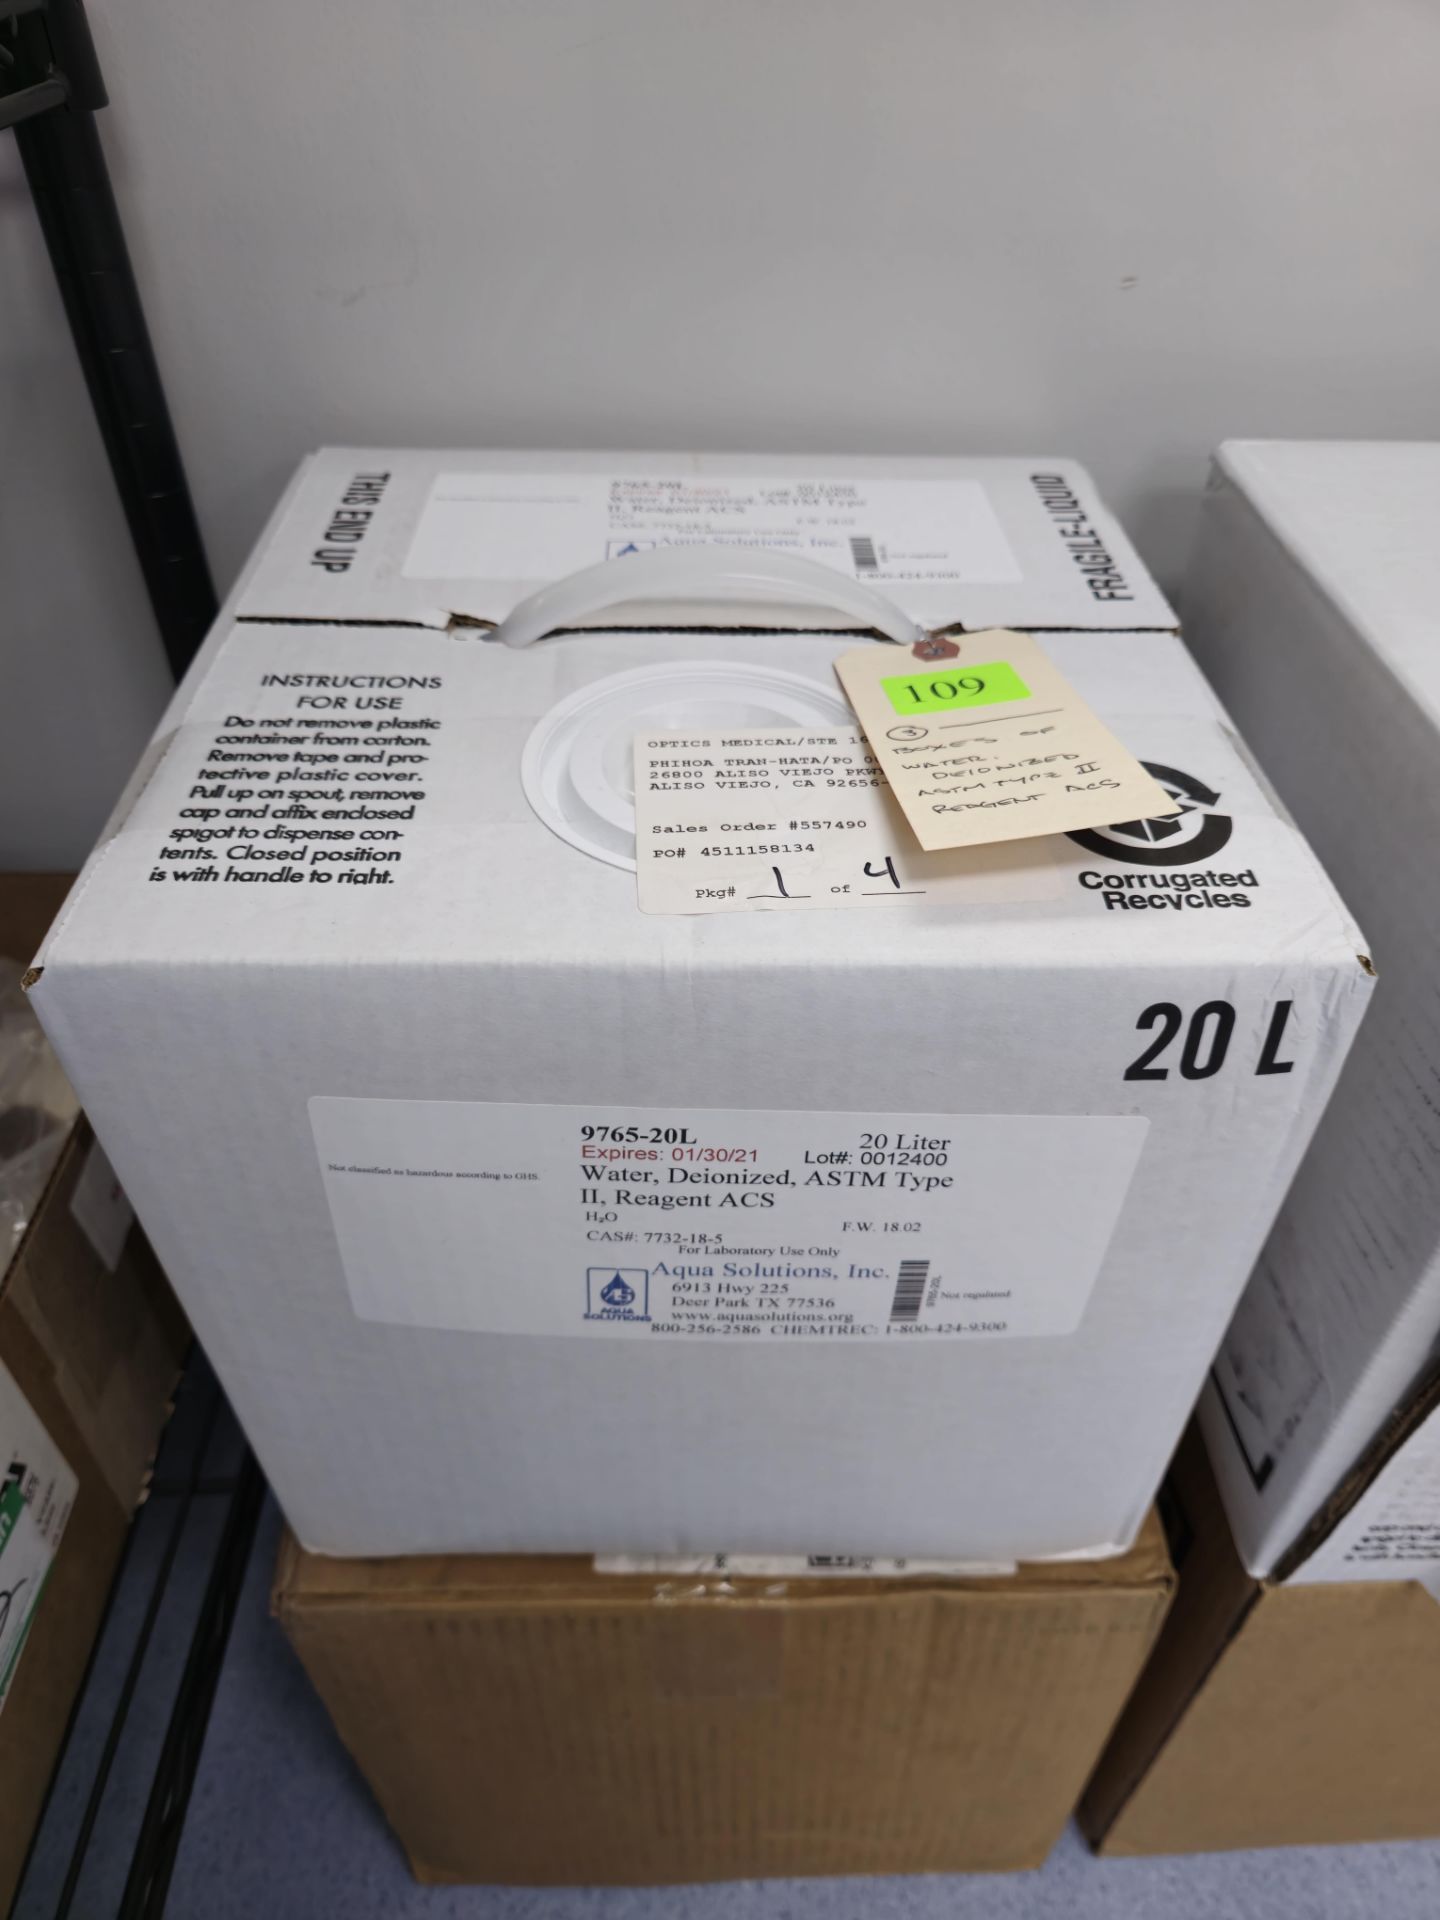 BOXES OF WATER DEIONIZED ASTM TYPE ll REAGENT ACS